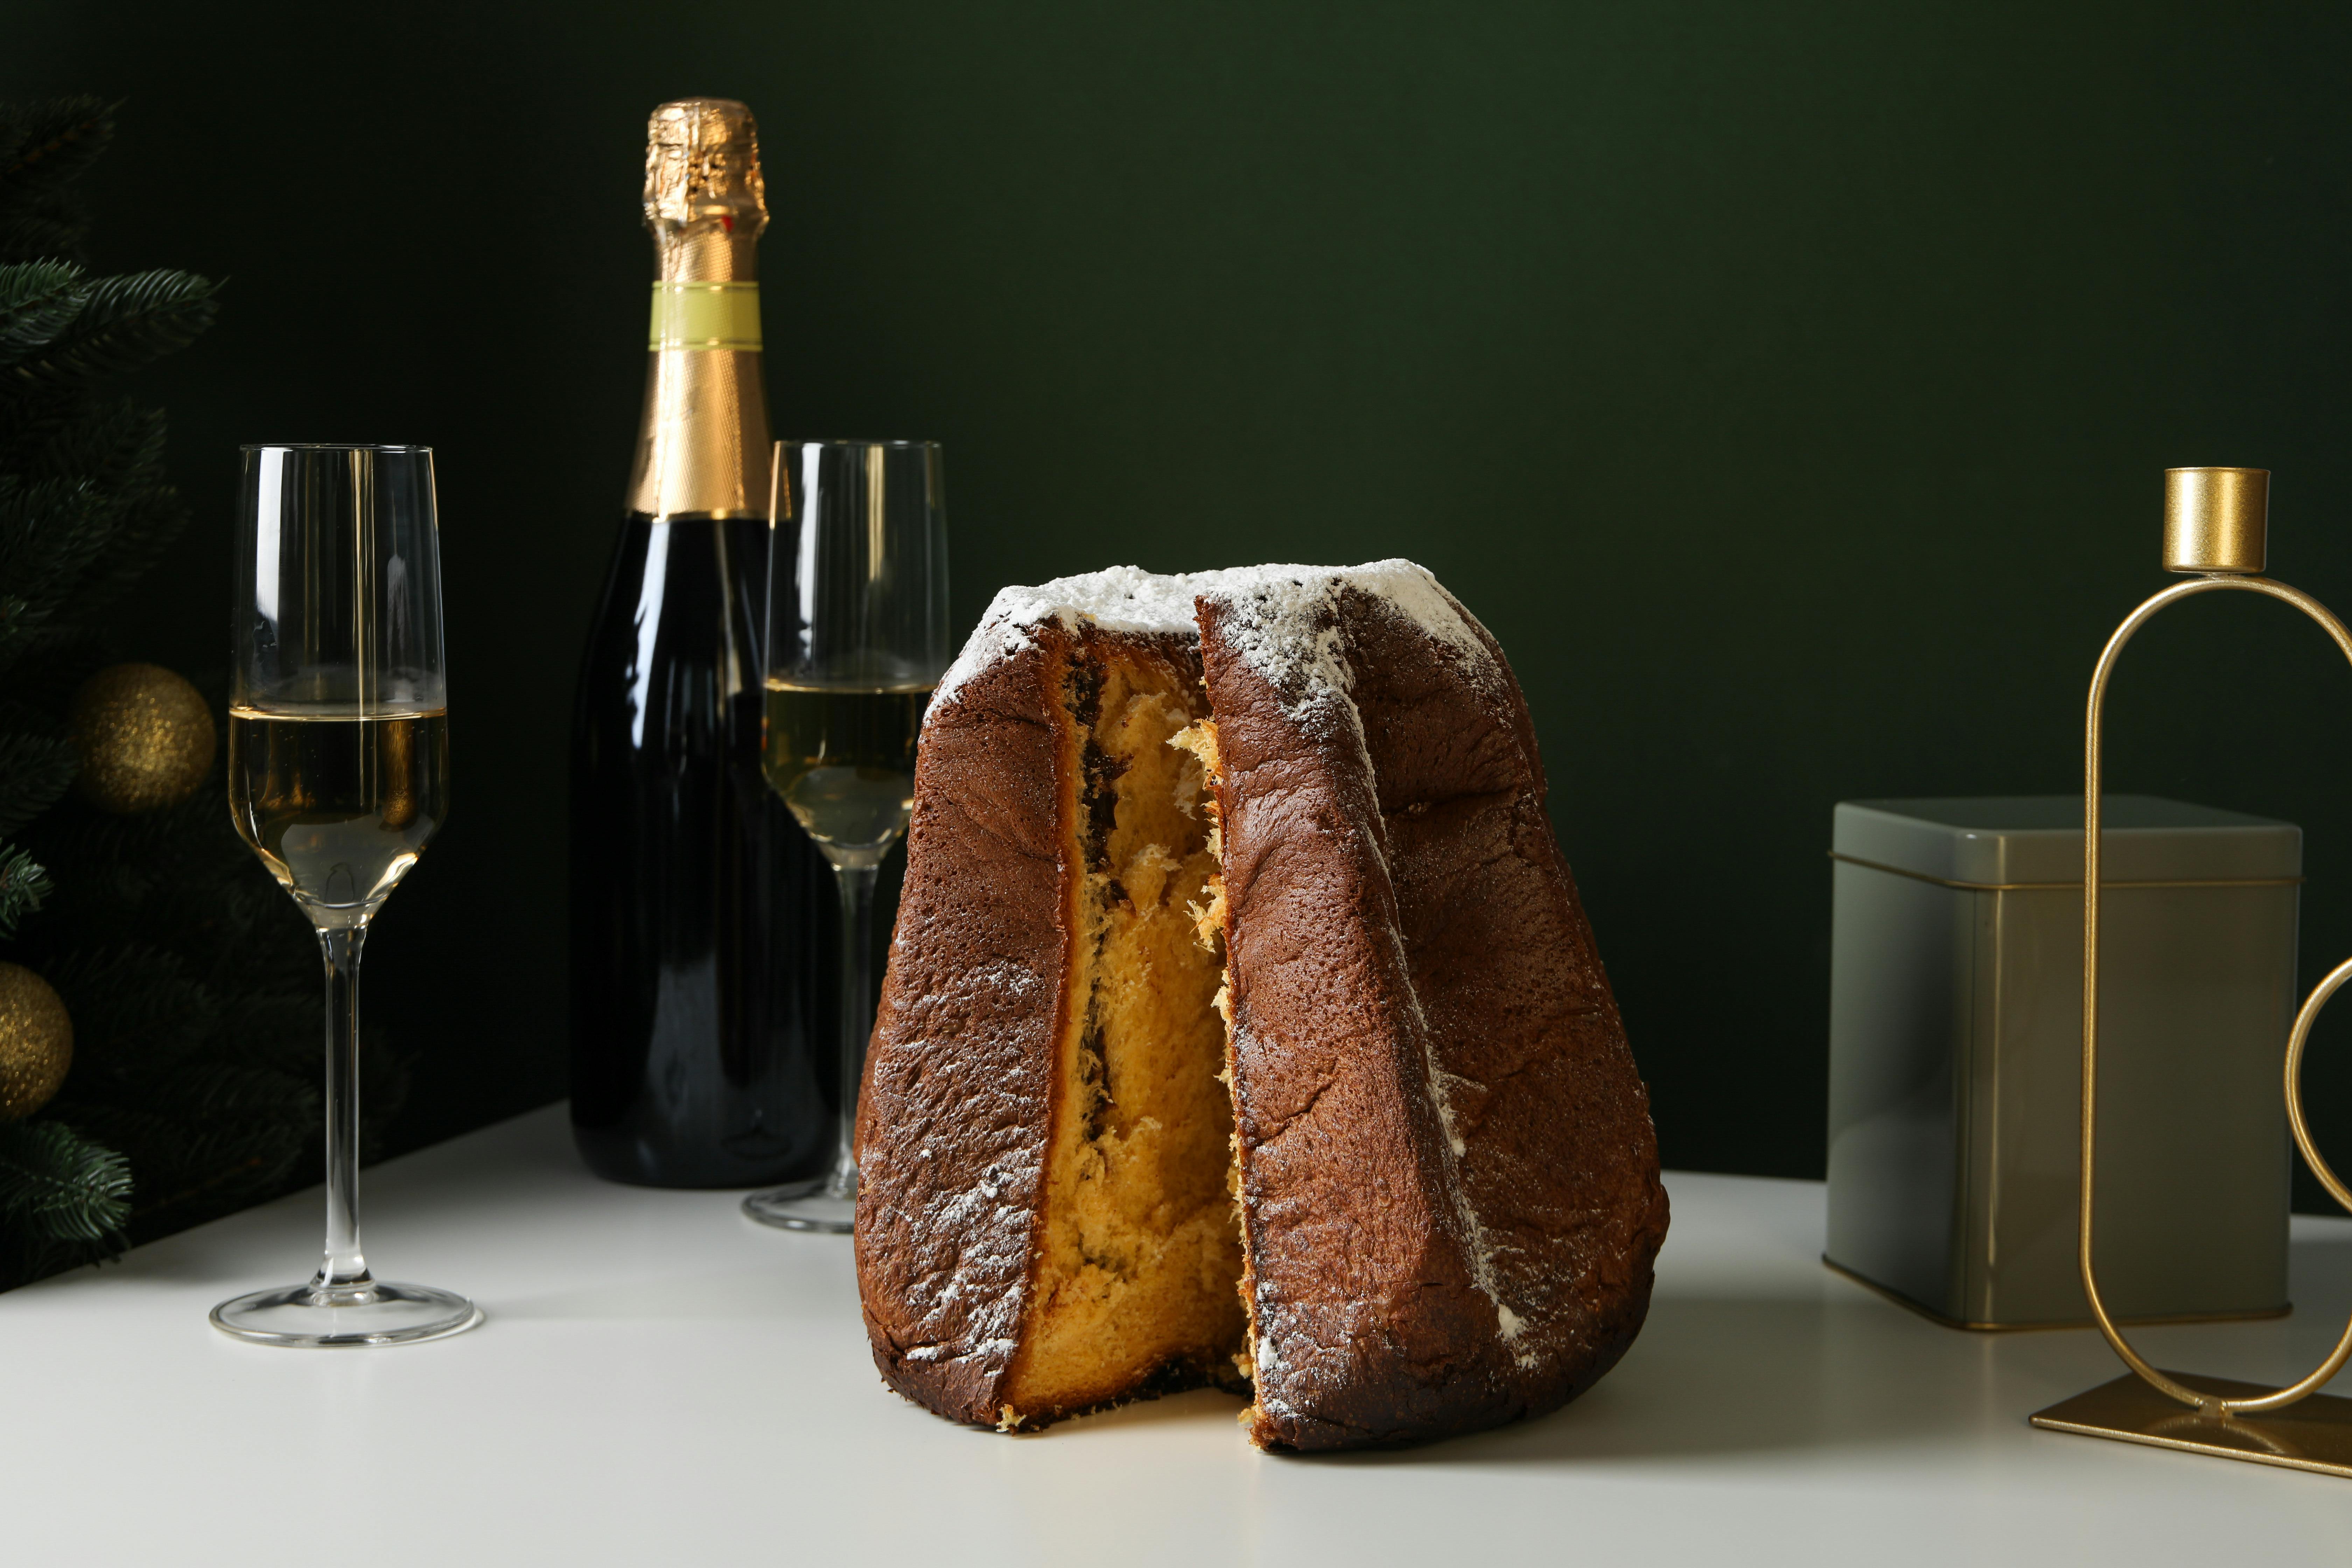 Table with pandoro and a bottle of sparkling wine